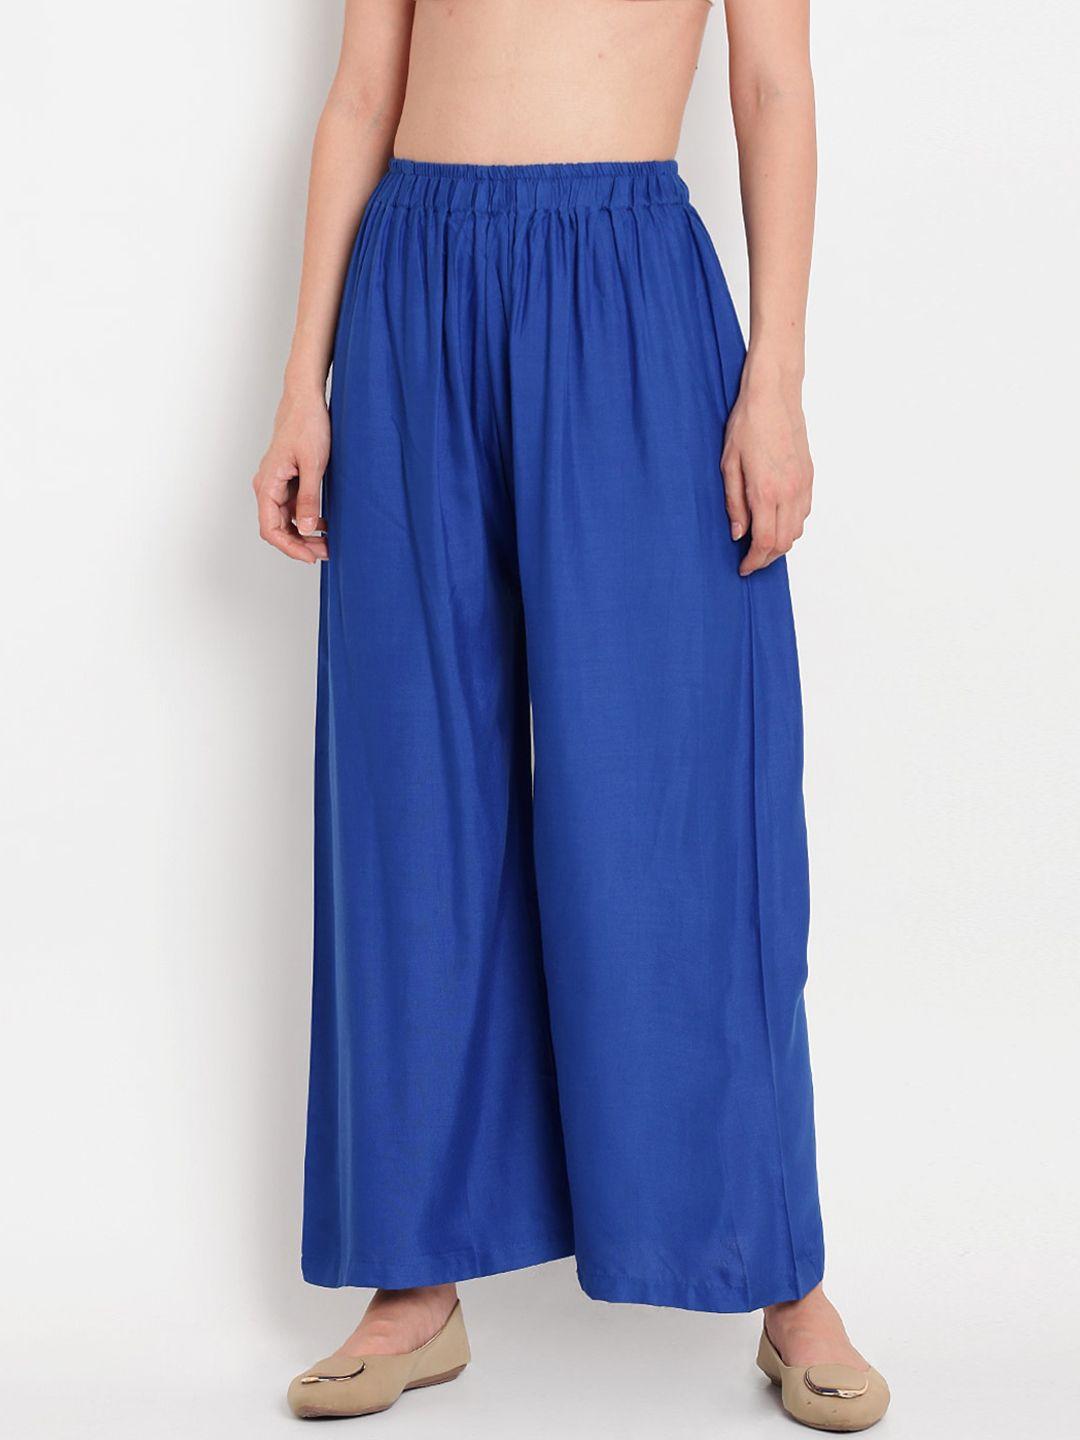 tag-7-women-plus-size-blue-solid-flared-palazzos